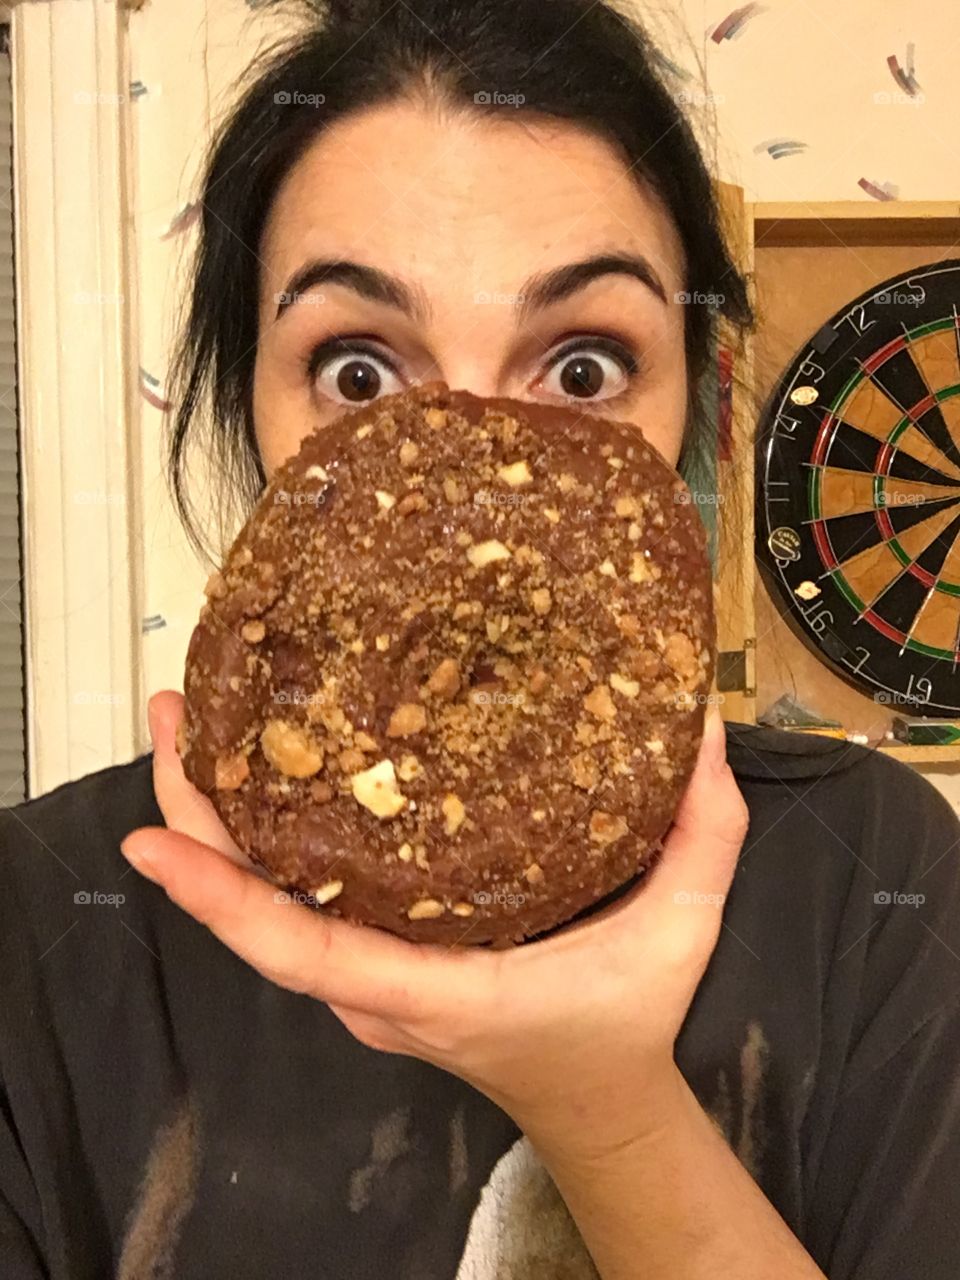 Donut as big as my face!